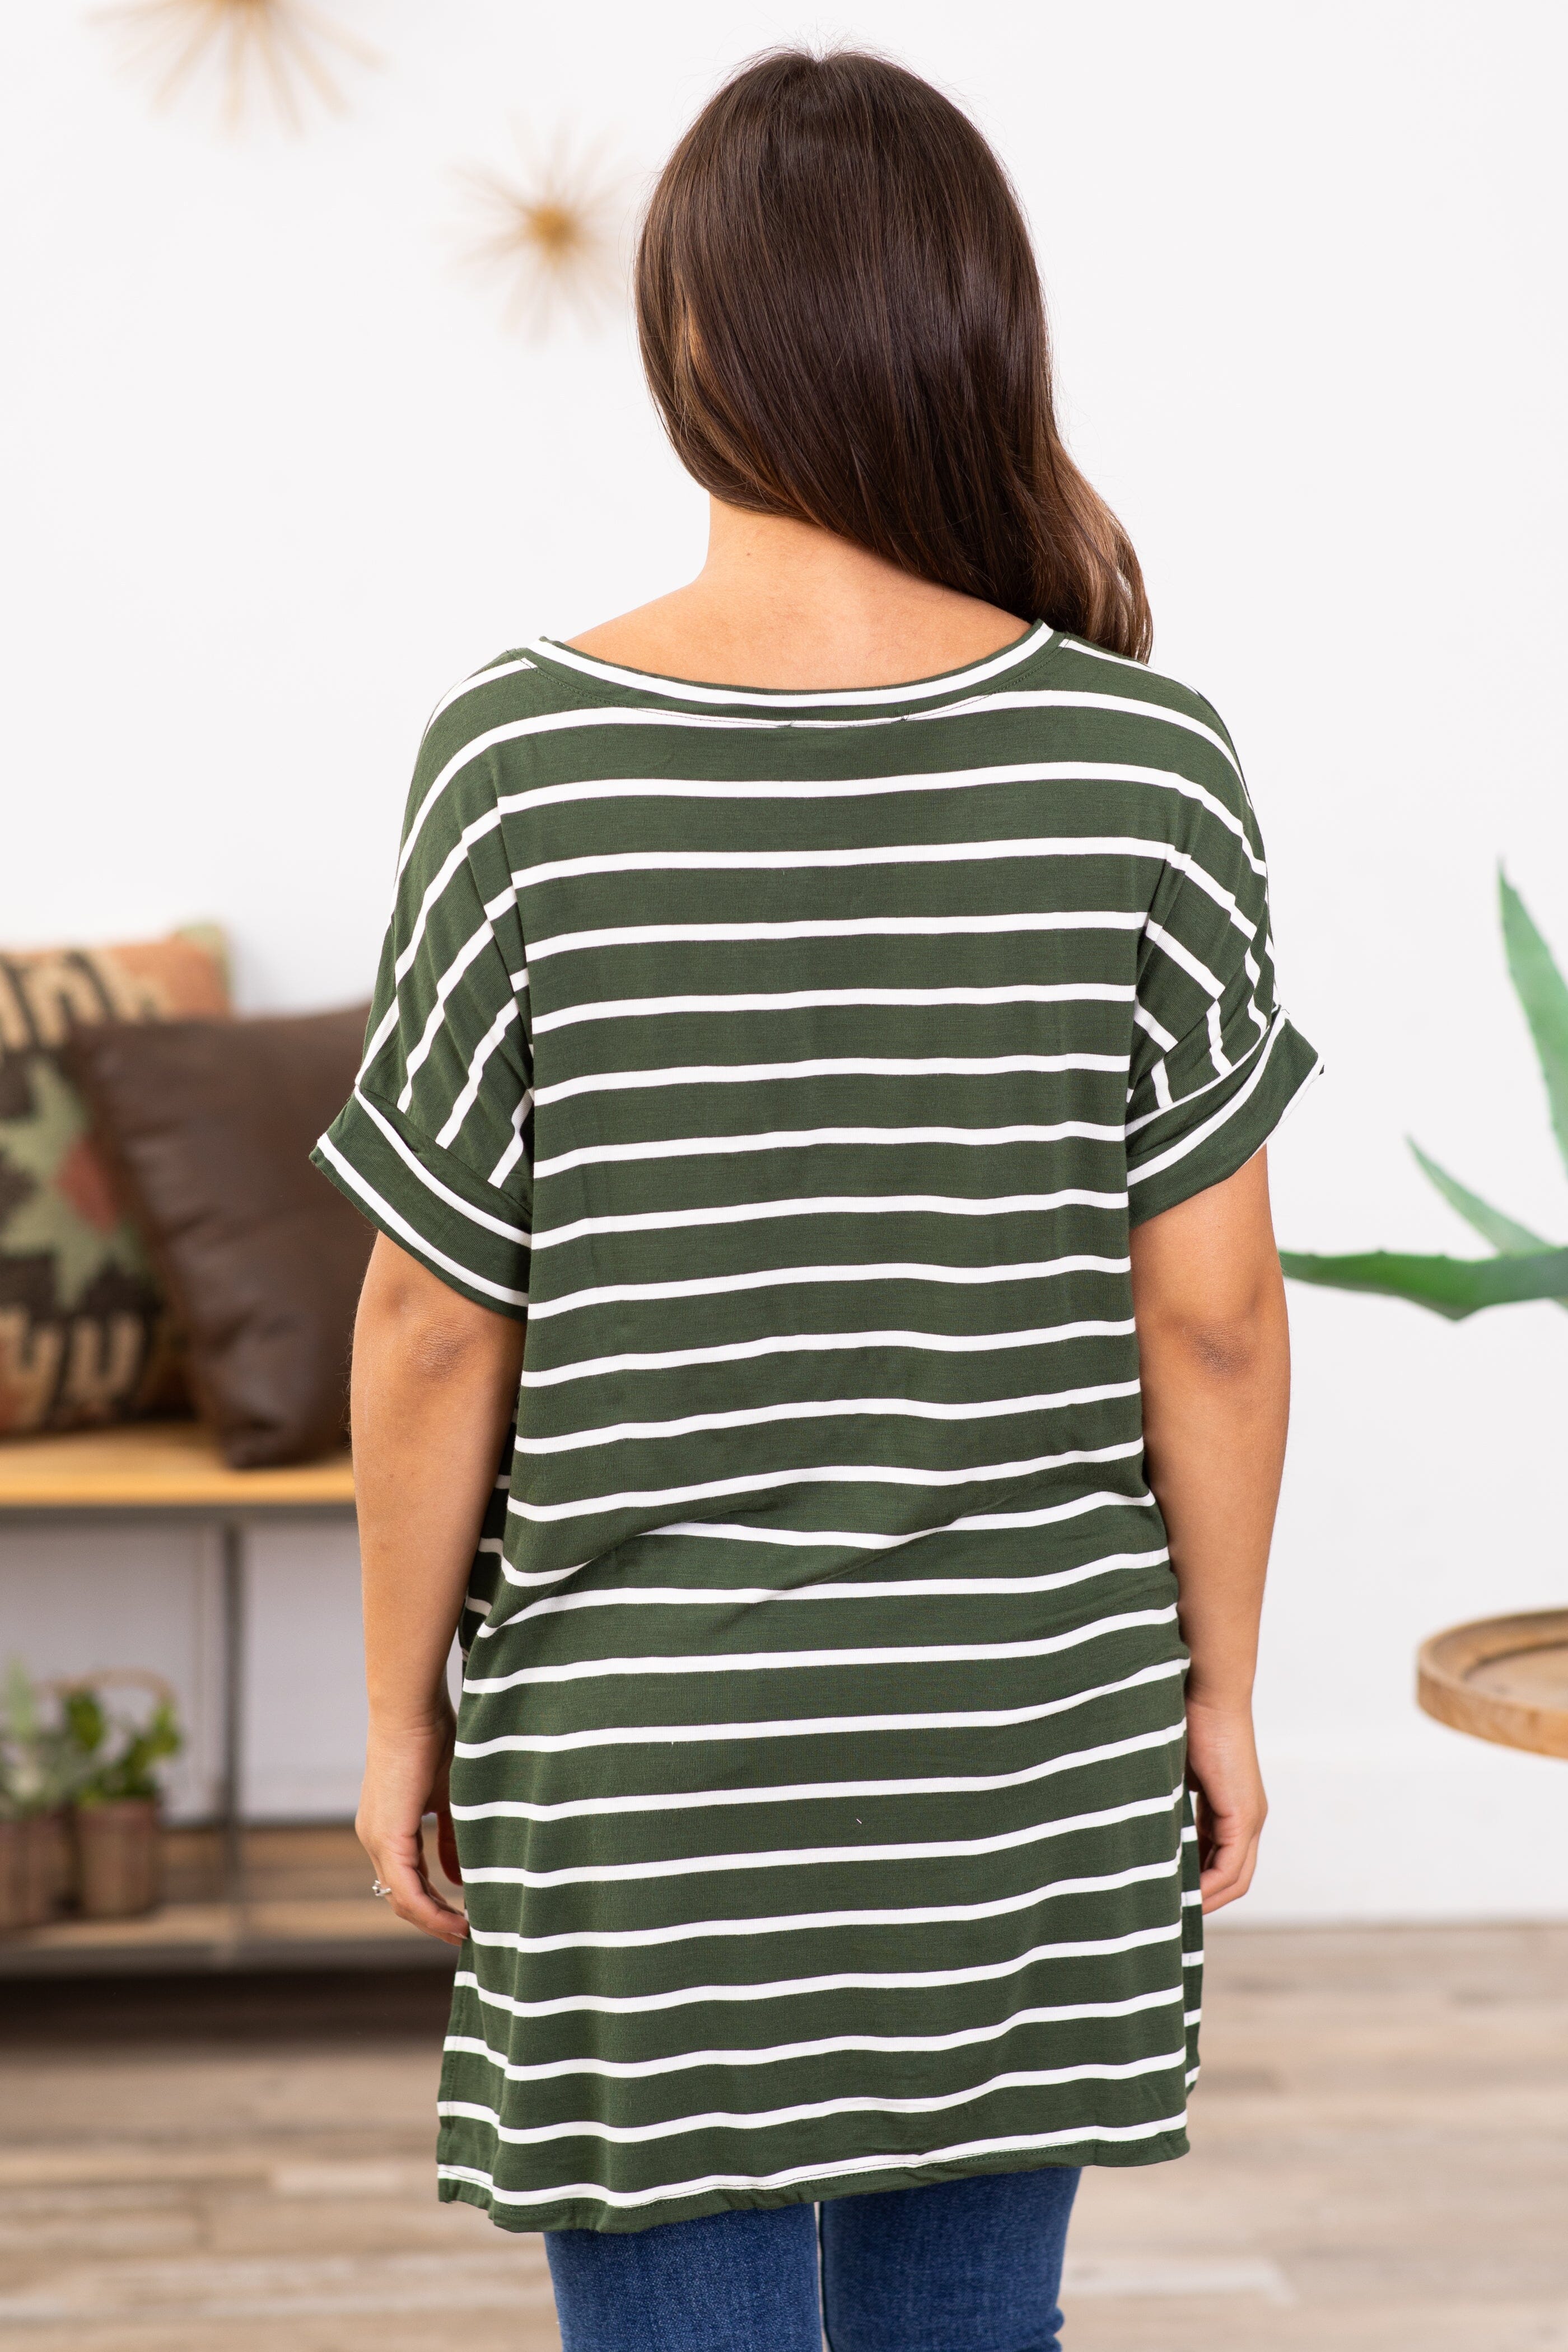 Hunter Green and Off White Stripe V-Neck Top - Filly Flair